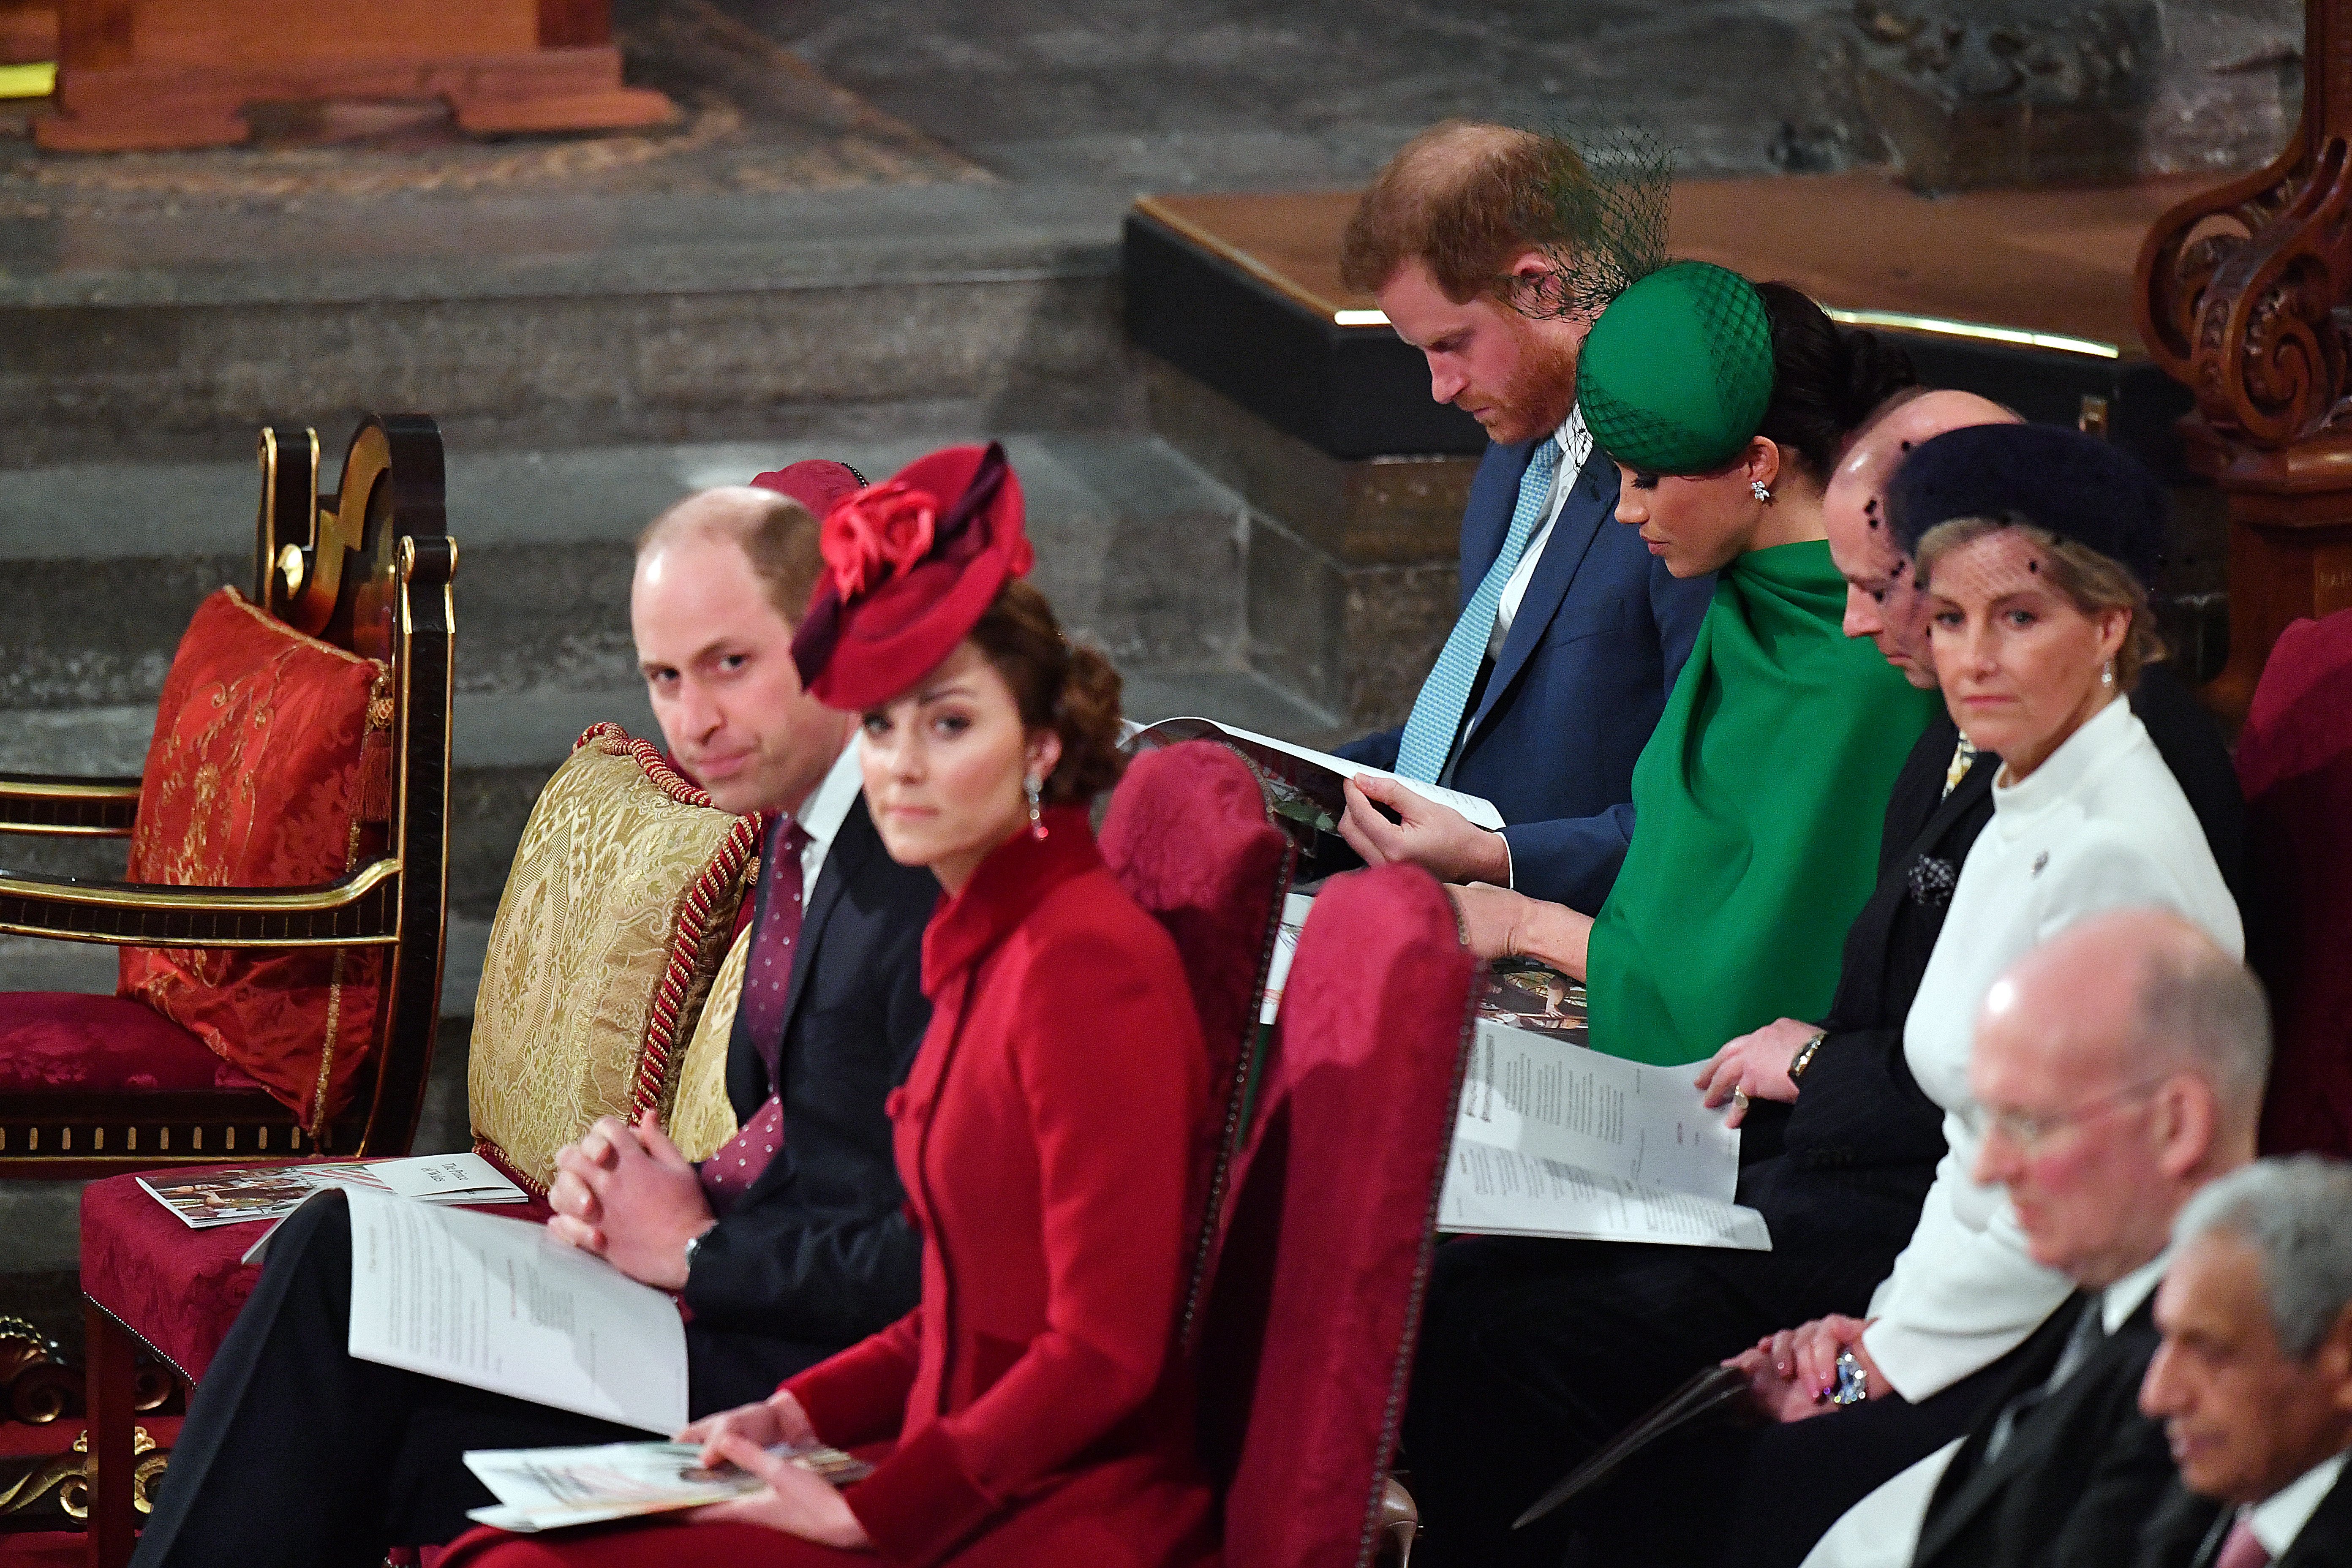 Prince William, Kate Middleton, Prince Harry, Meghan Markle, Prince Edward, Earl of Wessex and Sophie, Countess of Wessex attend the Commonwealth Day Service 2020 on March 9, 2020 in London, England | Photo: Getty Images